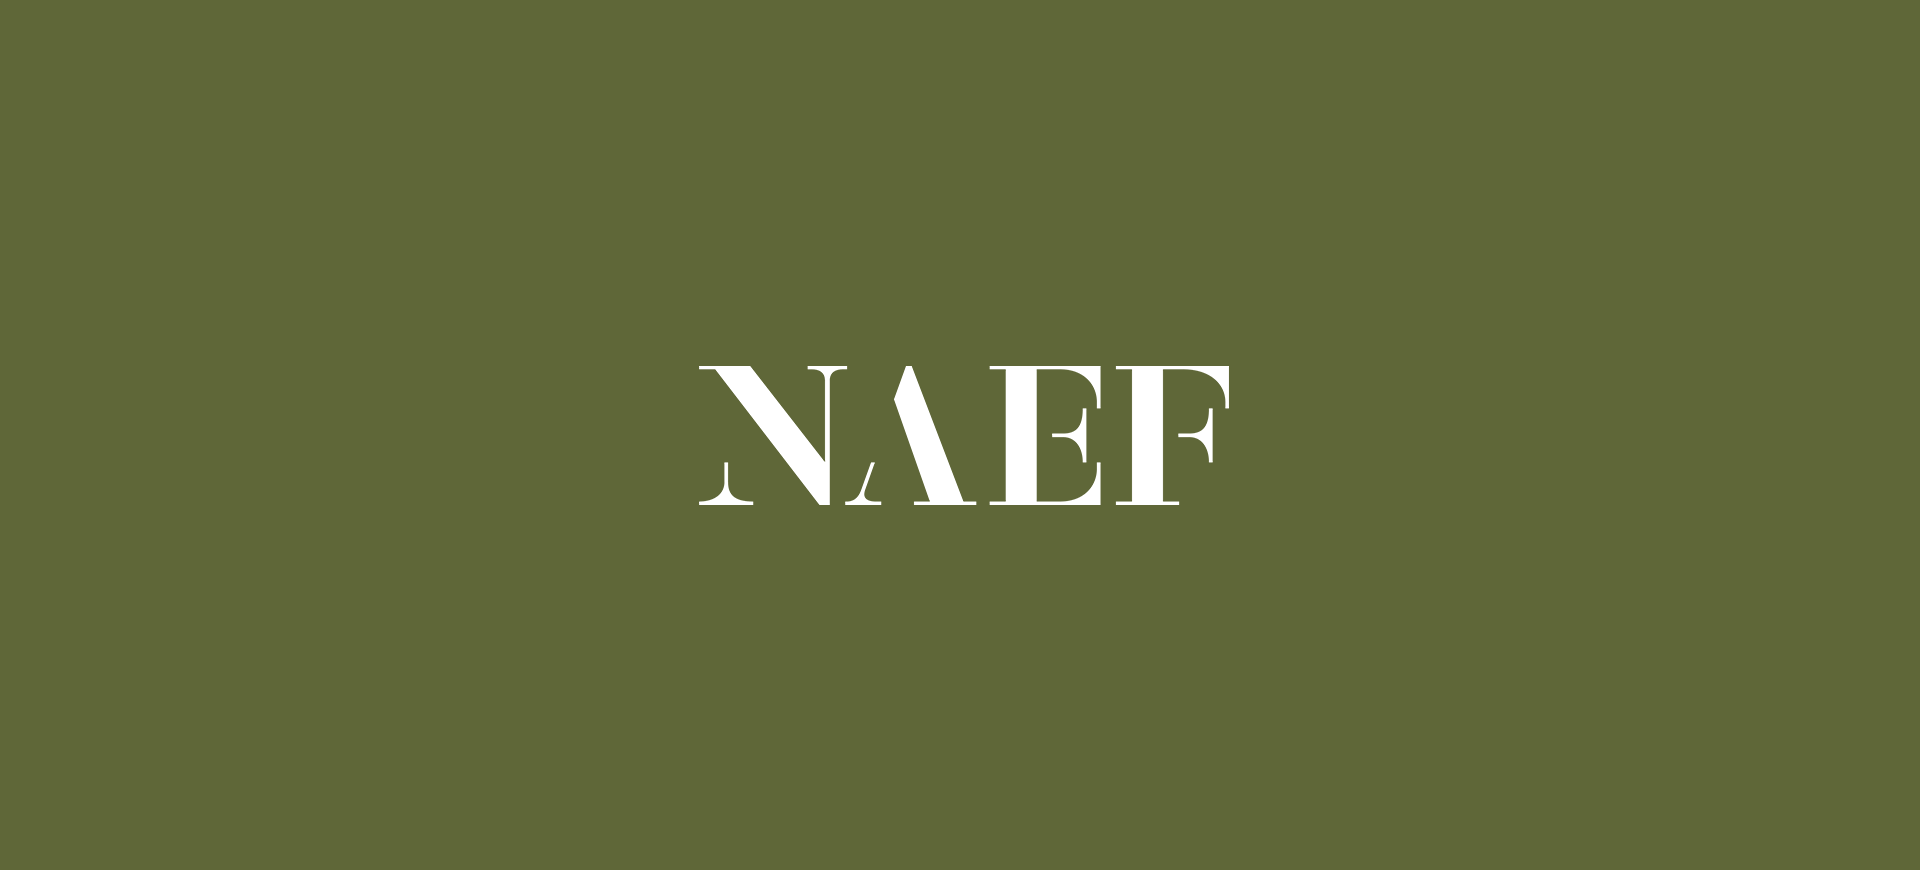 Naef_01